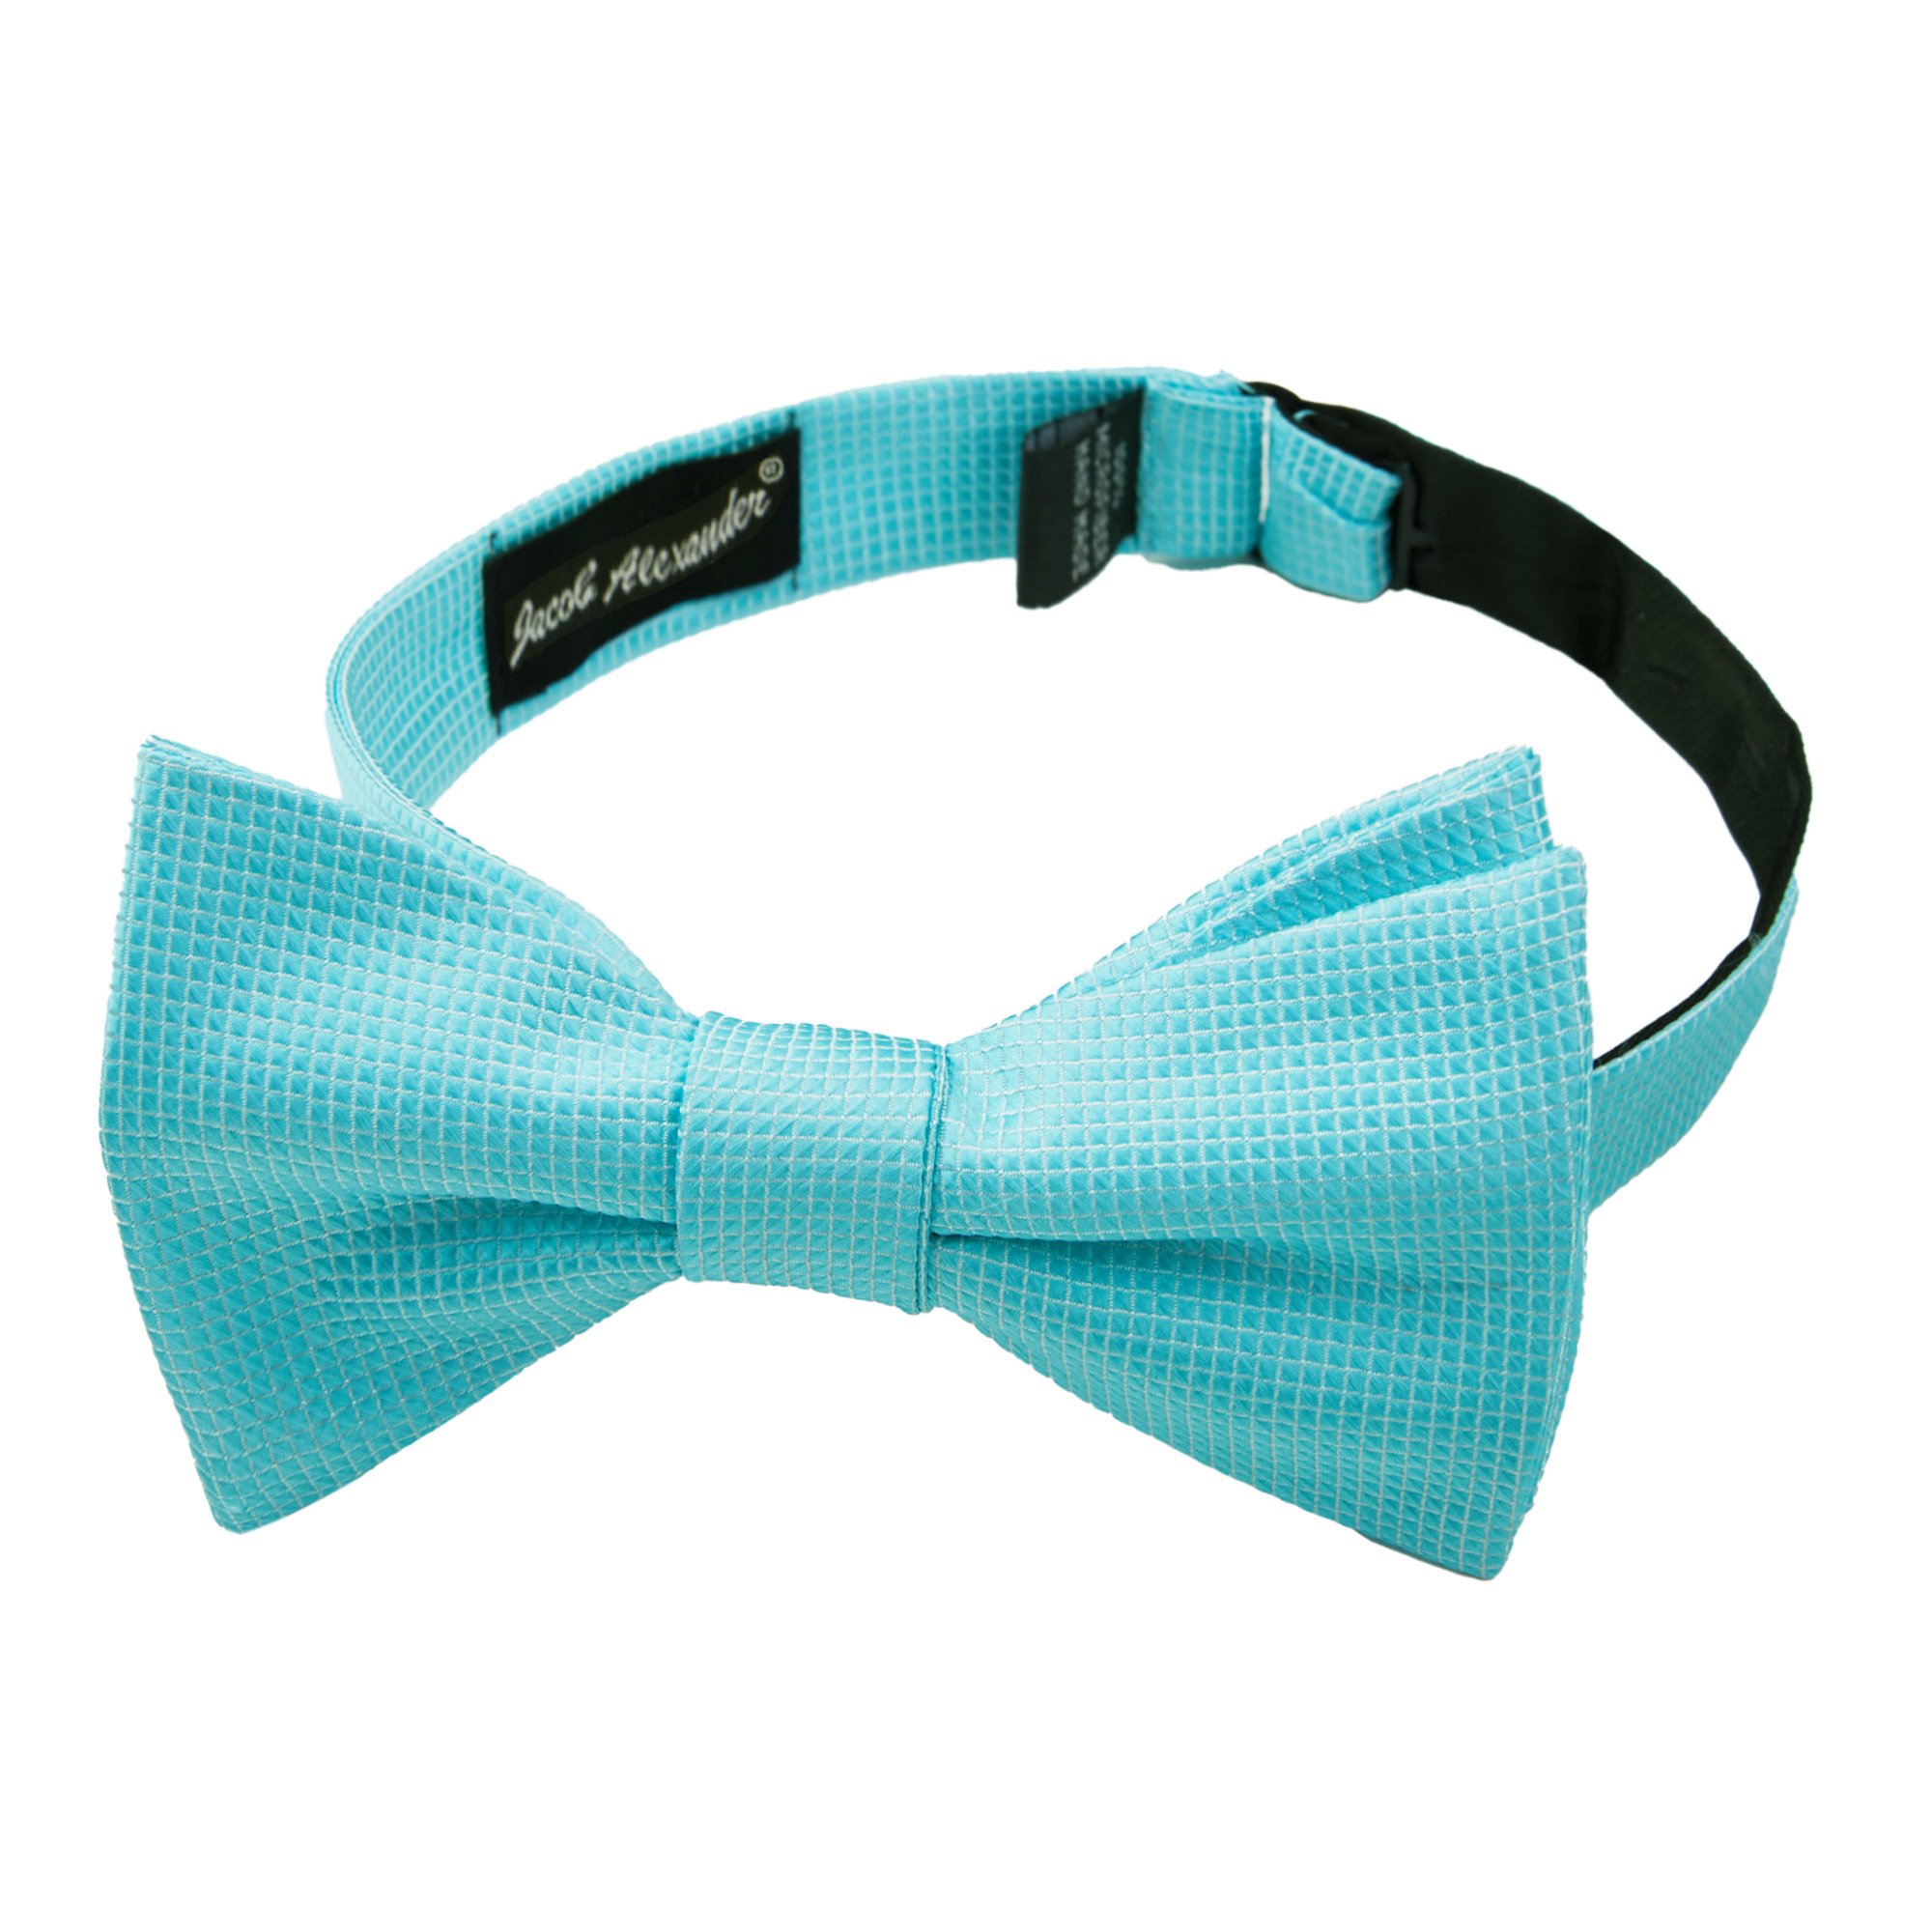 4 Piece Set: Jacob Alexander Men and Young Boys' Woven Subtle Mini Squares Self-Tie Bow Tie Adjustable Pre-Tied Banded Bow Tie and Pocket Squares - Light Turquoise - image 2 of 7